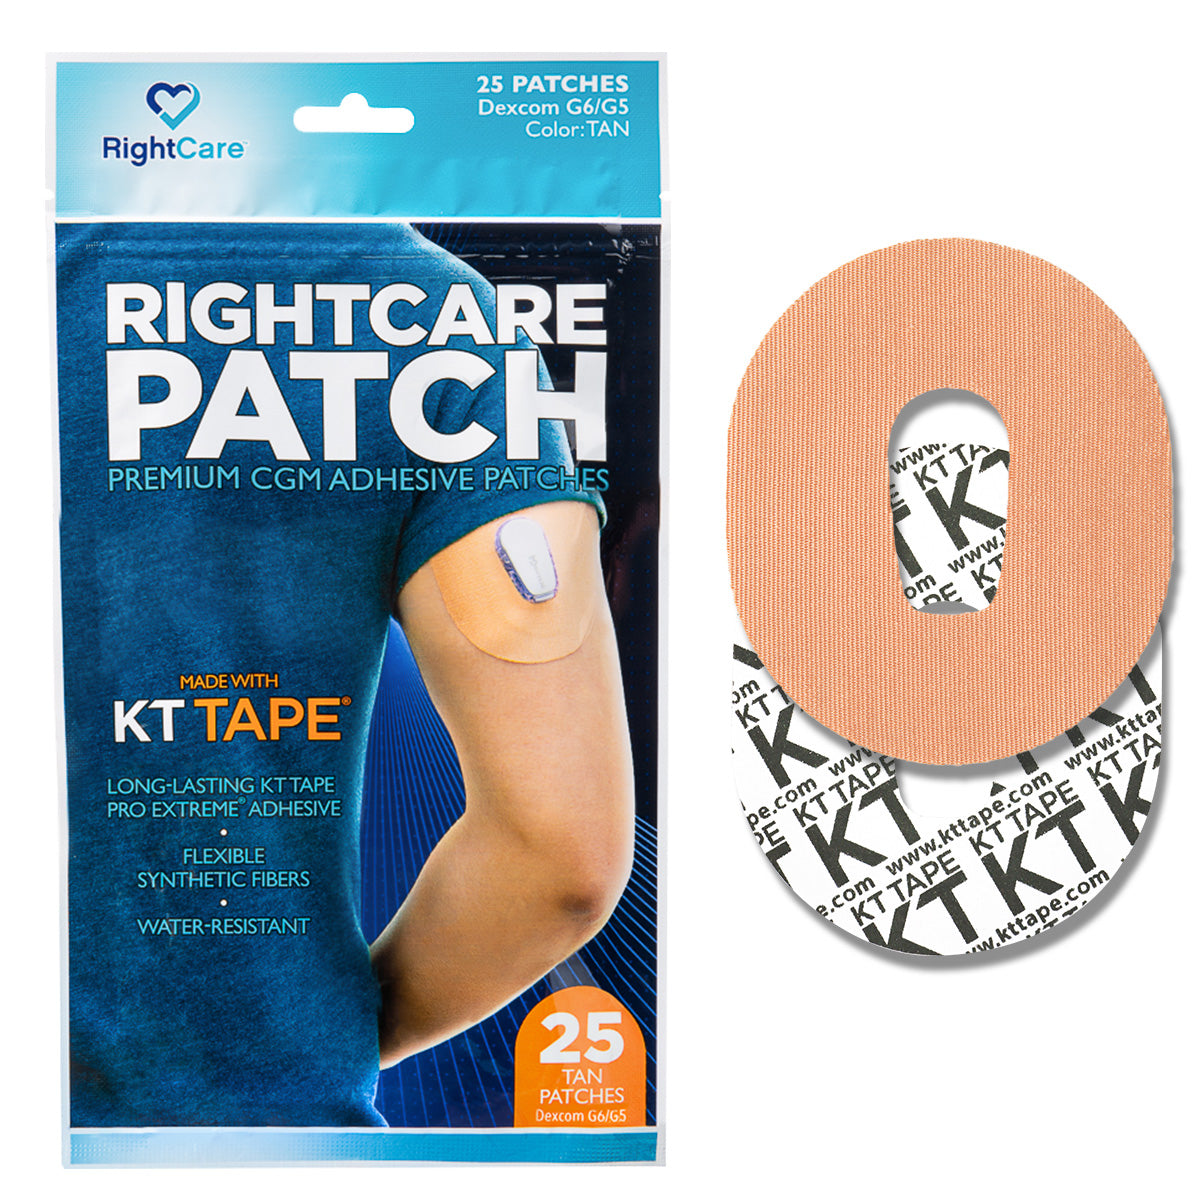 RightCare CGM Adhesive Patch made with KT Tape, Dexcom G6, Bag of 25 –  RightCare Patch